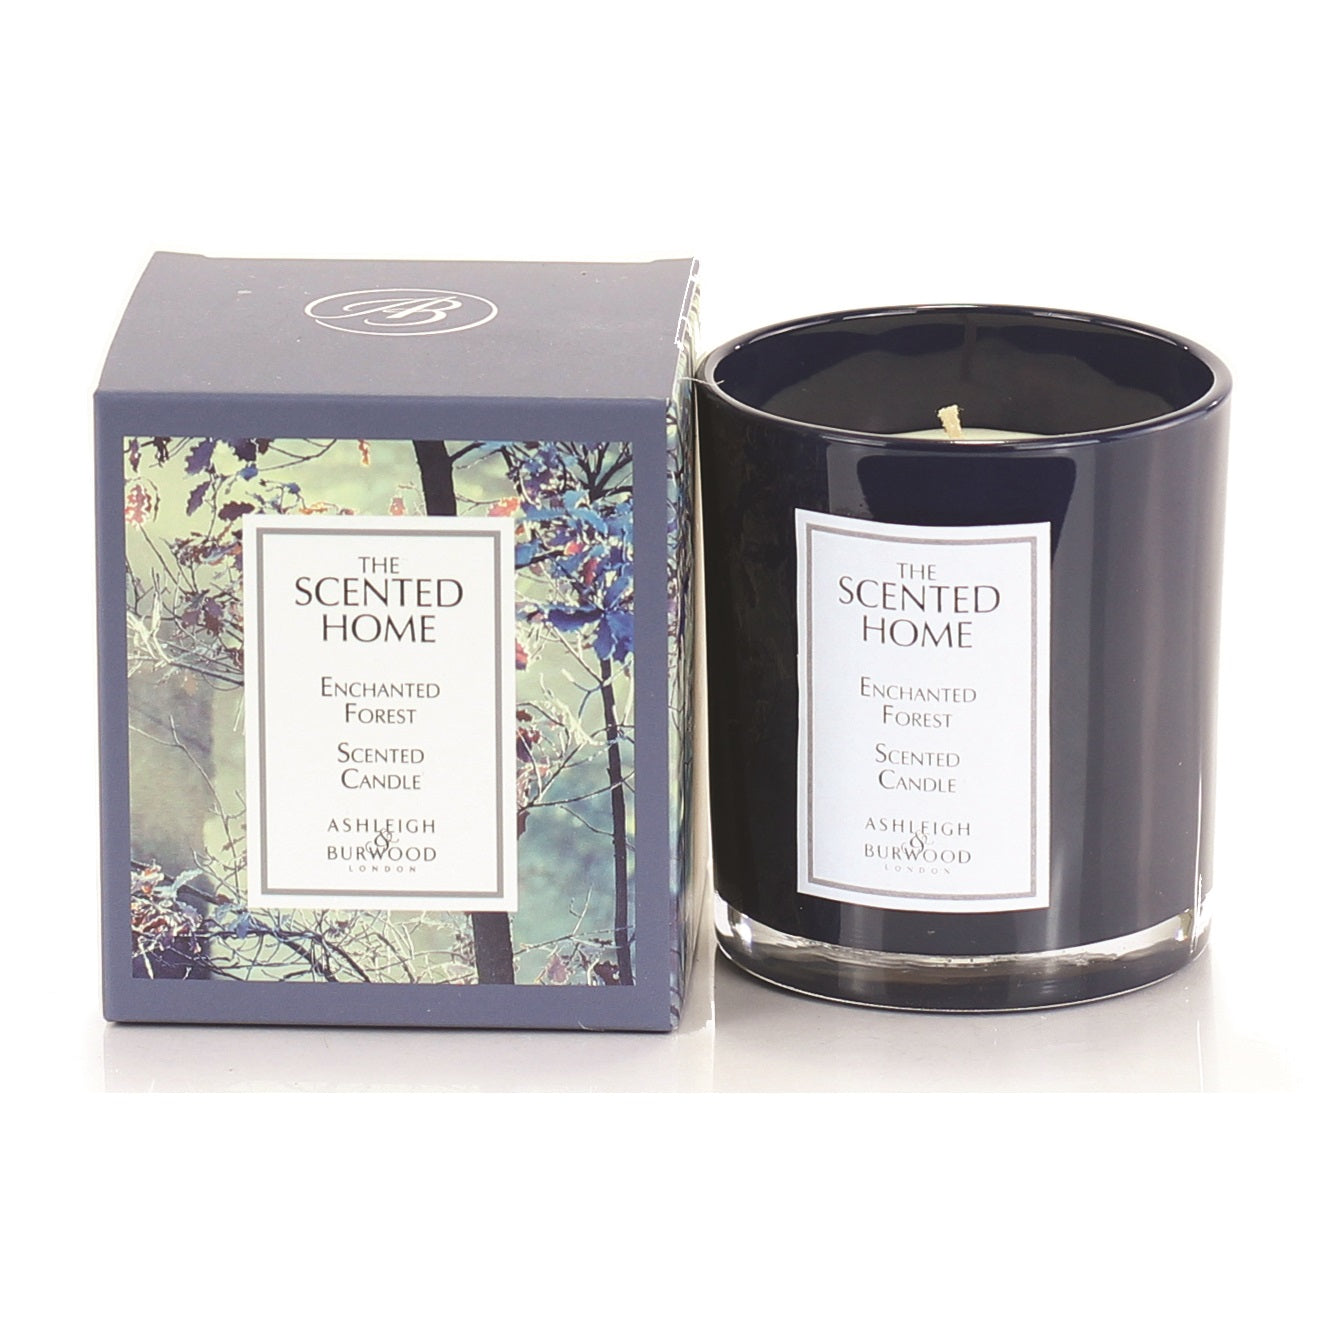 BOXED GLASS CANDLE 225G ENCHANTED FOREST - SCENTED HOME